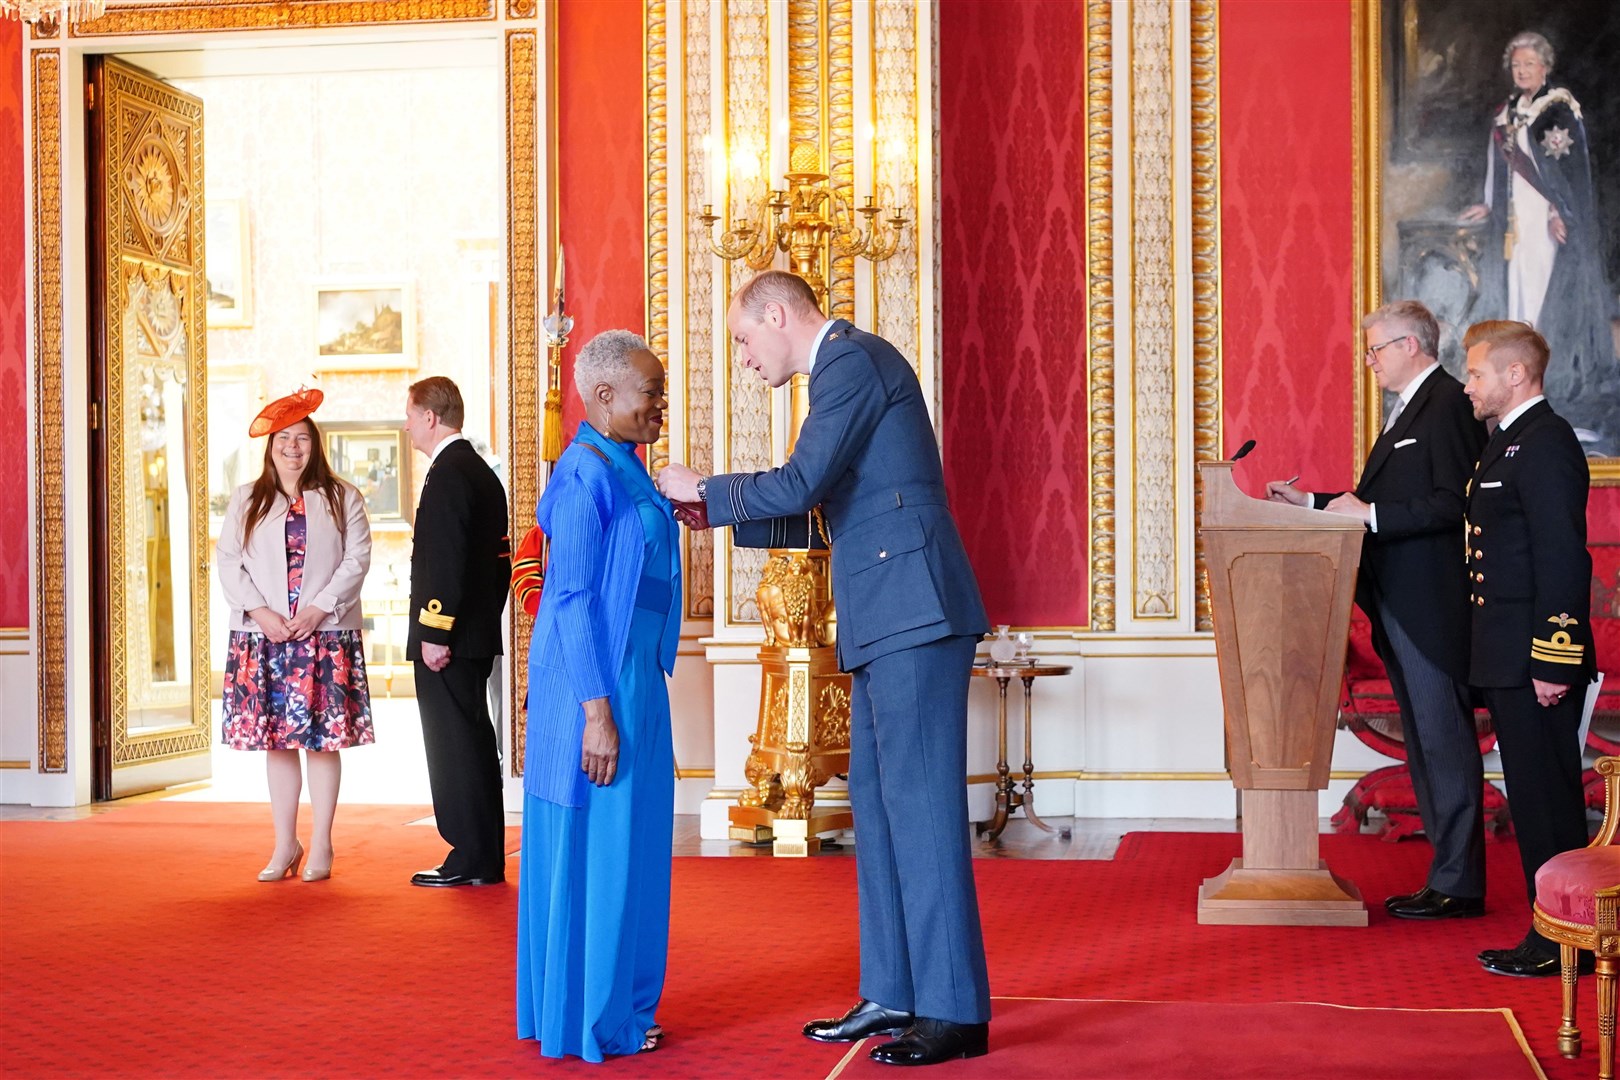 Claudette Johnson was honoured with an MBE by the Prince of Wales at Buckingham Palace in June 2022 (Dominic Lipinski/PA)